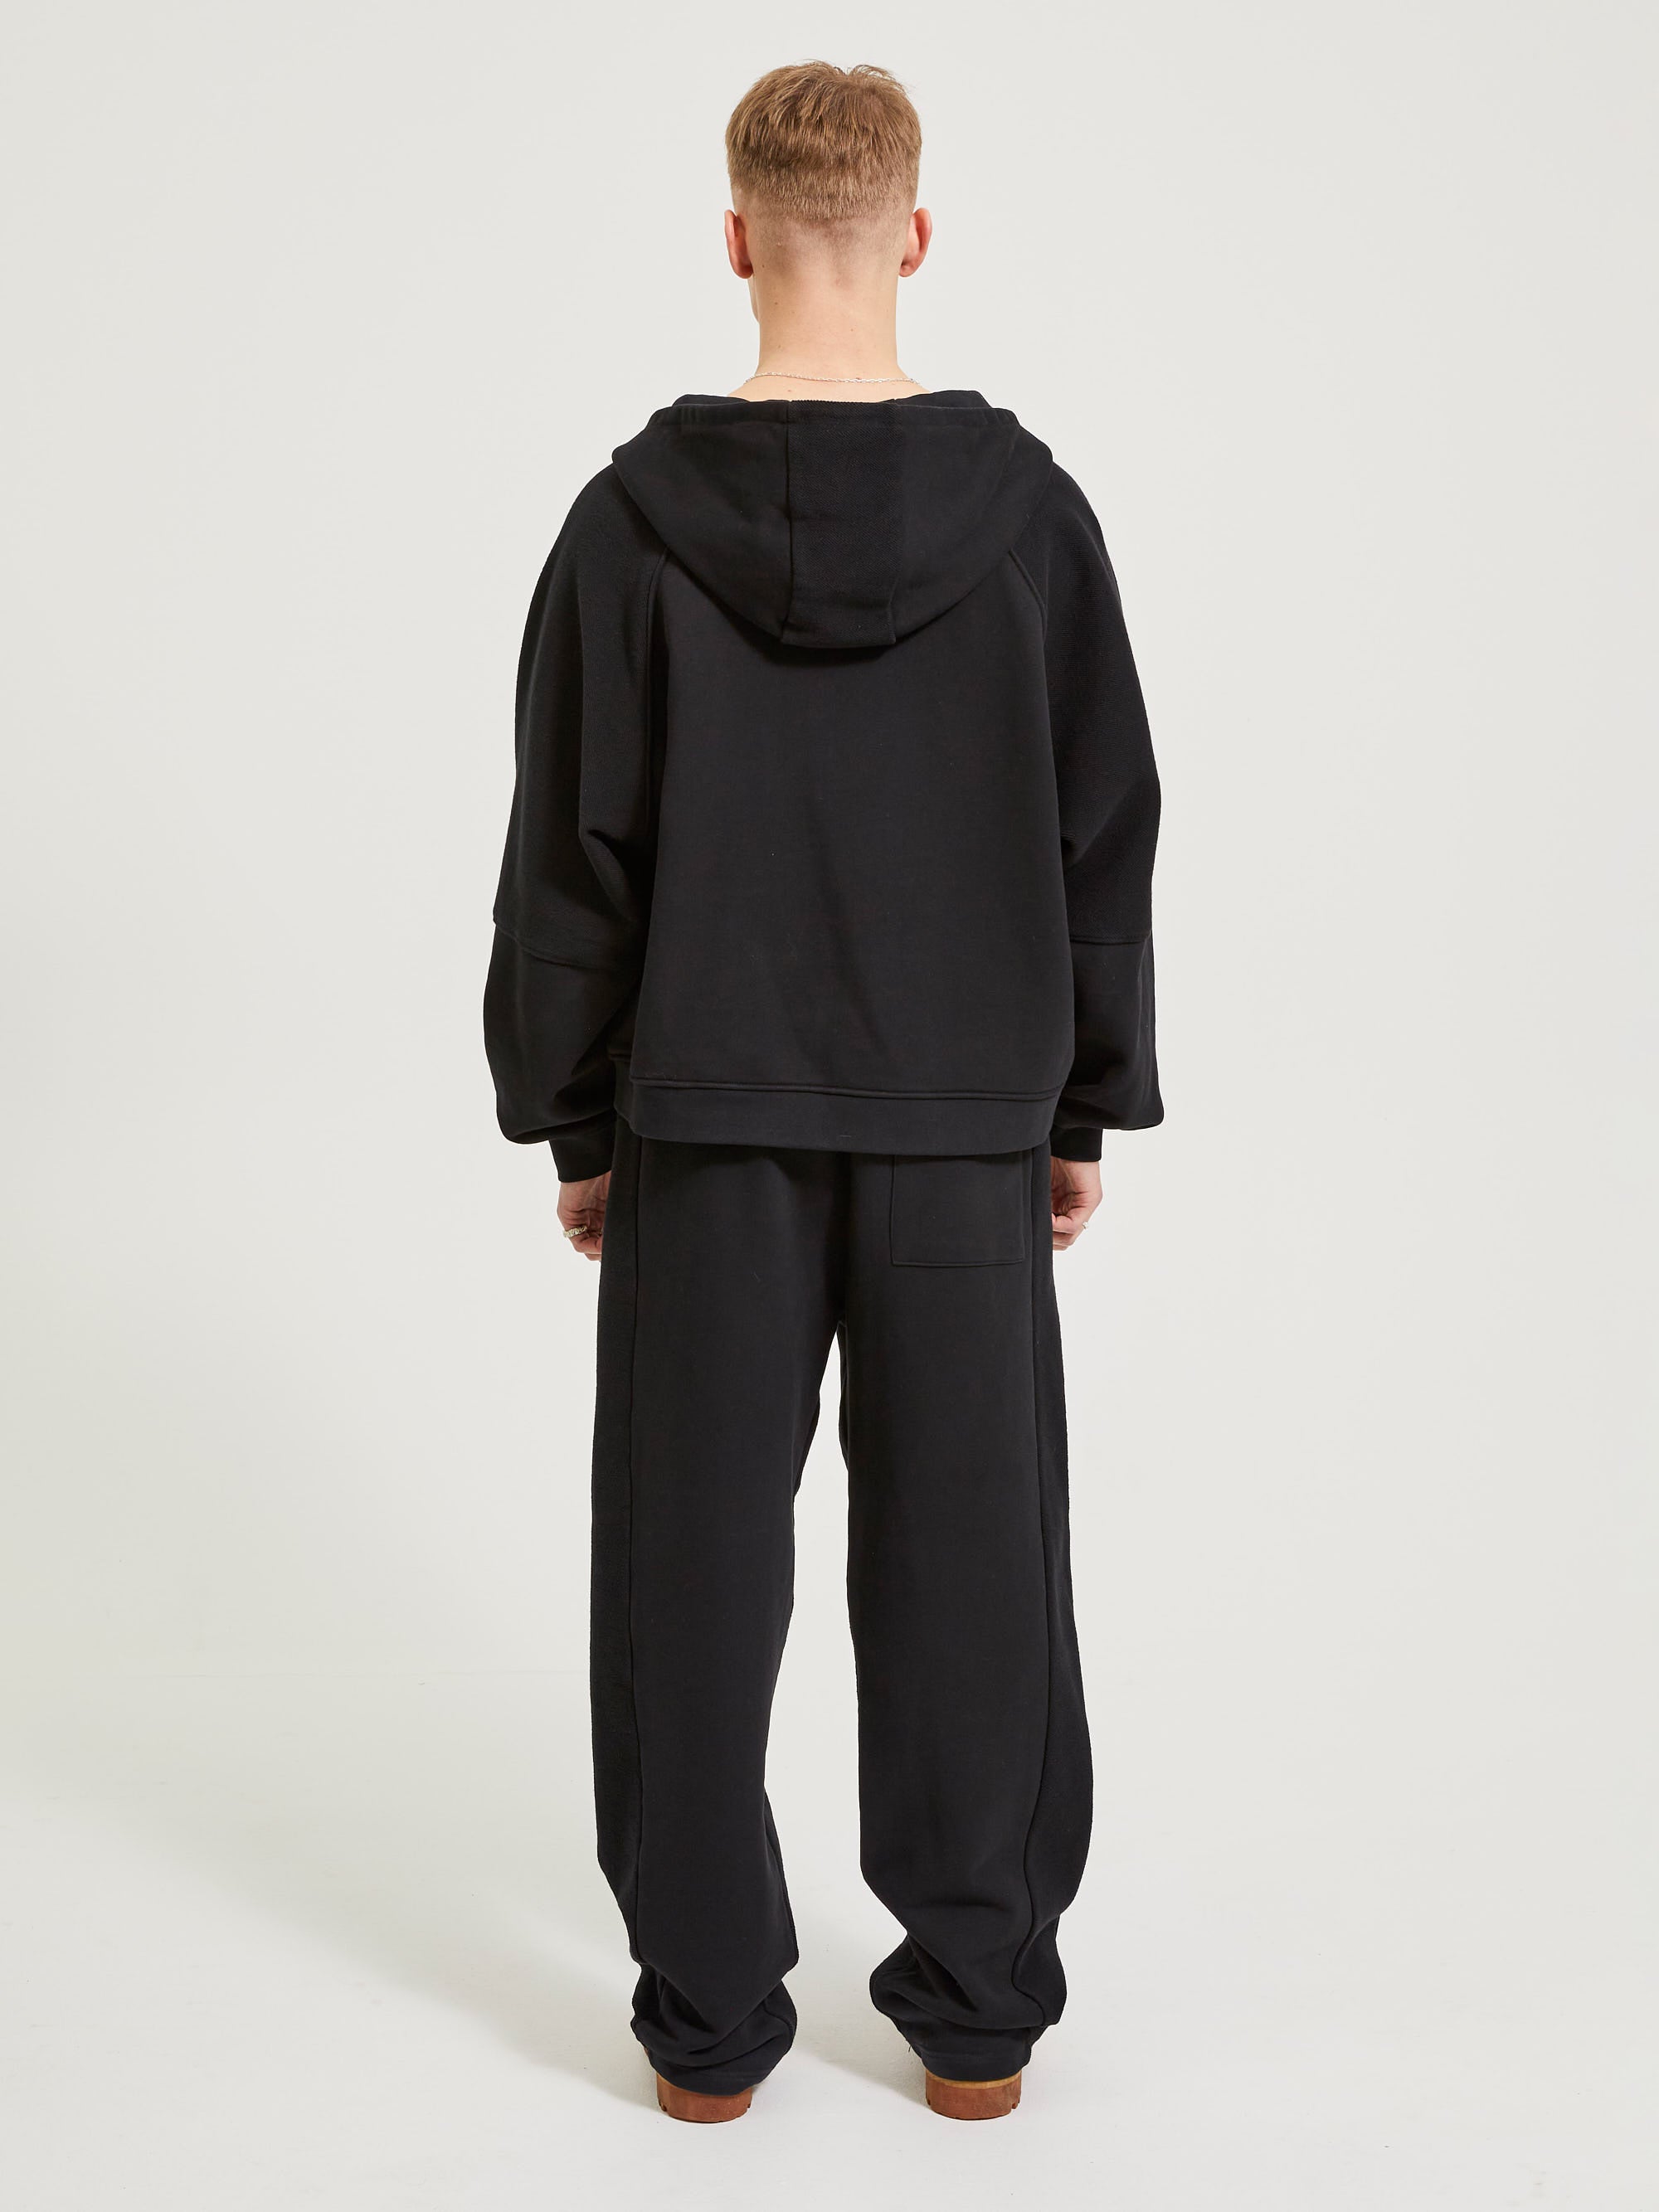 INSIDE OUT SWEATPANTS BLACK - ATTODE